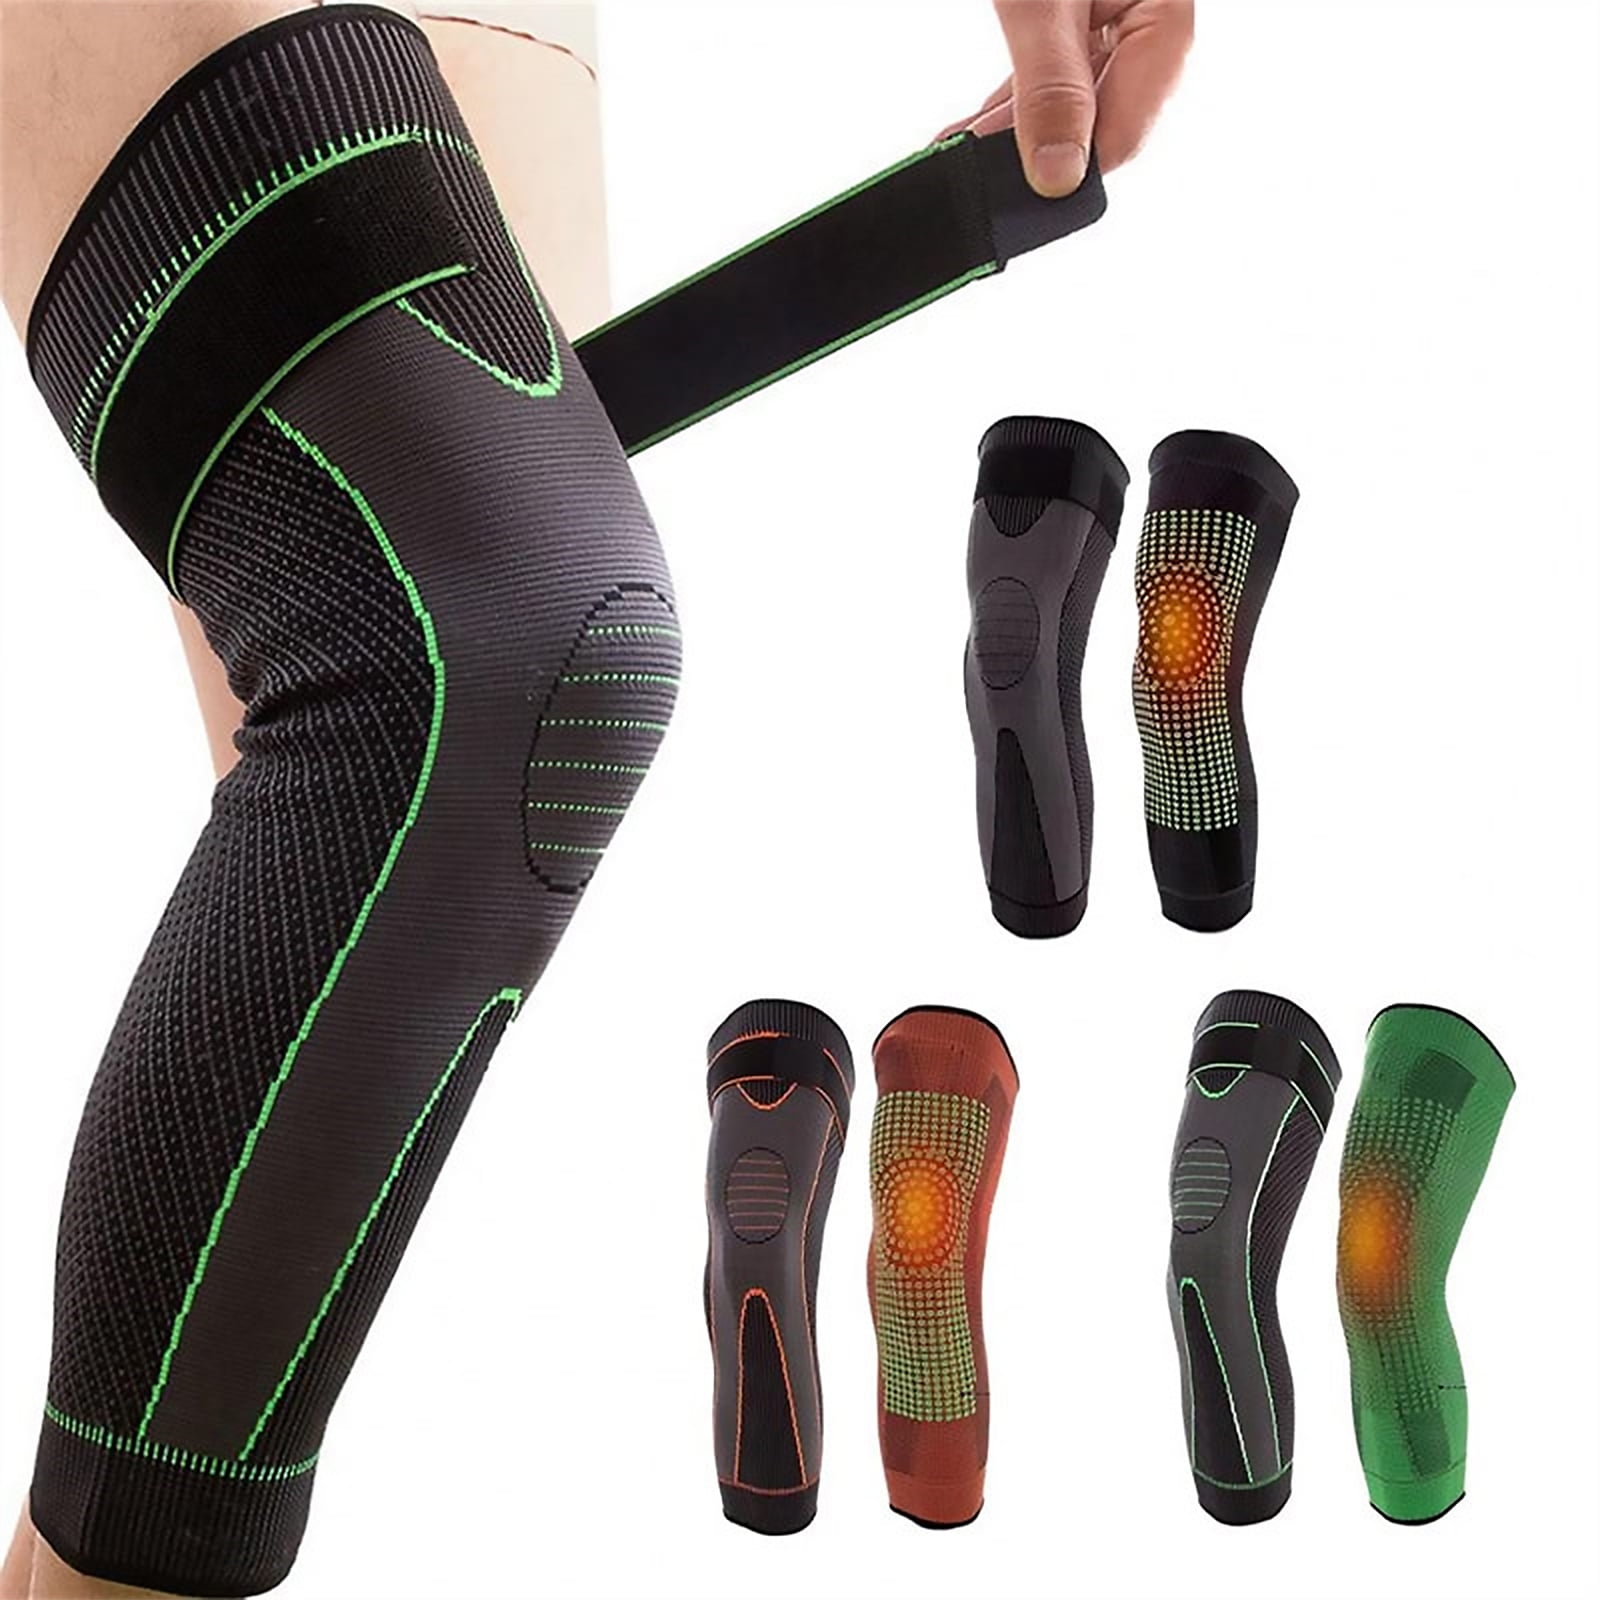 Vital SALVEO-Sports and Outdoor Pressure Long Knee Sleeve Leg Support (Under Sleeve for Knee Braces) That Can Be Worn by Fiberglass Material That Can